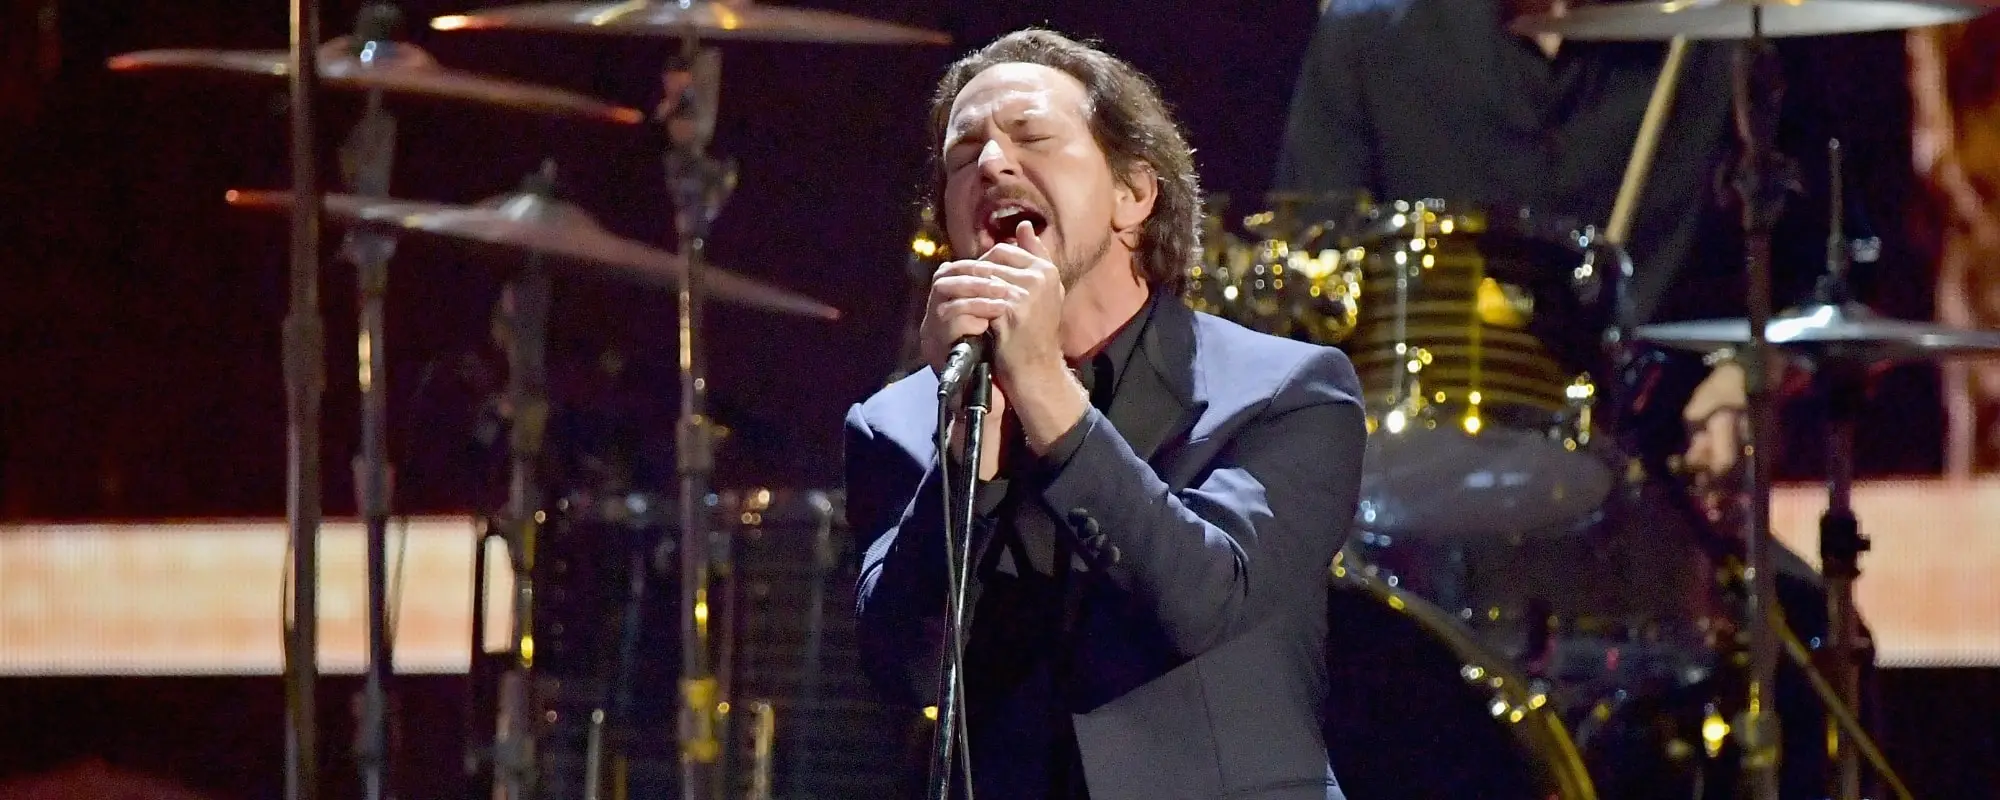 Watch Pearl Jam Get the Crowd in Vancouver Fired Up with “Better Man” to Start Their Dark Matter Tour